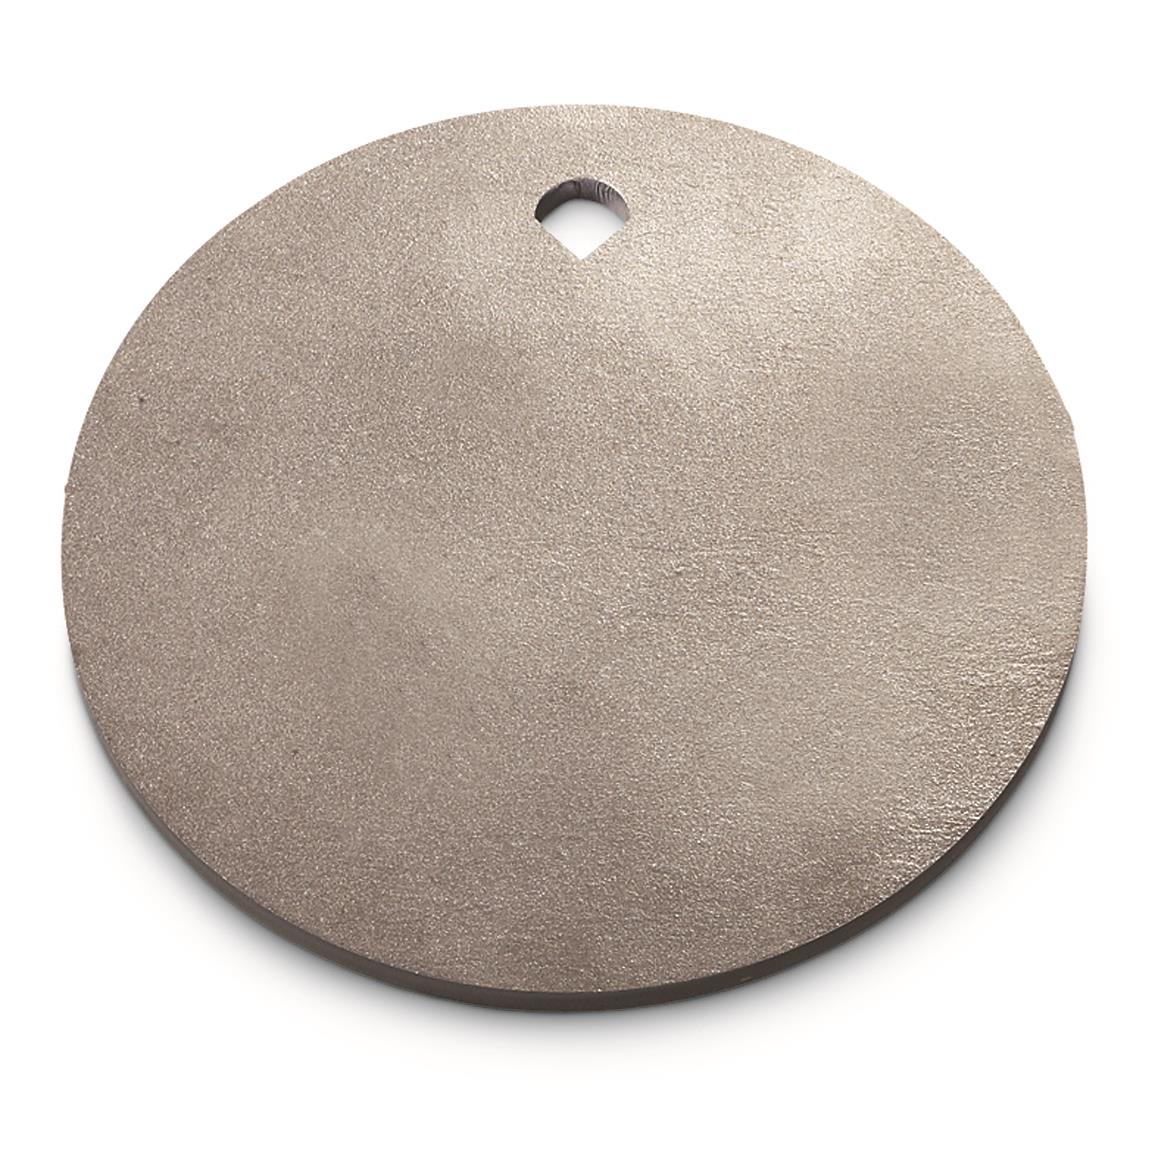 CTS AR500 Hardened Steel Plate Round Shooting Target, 3/8" Thick